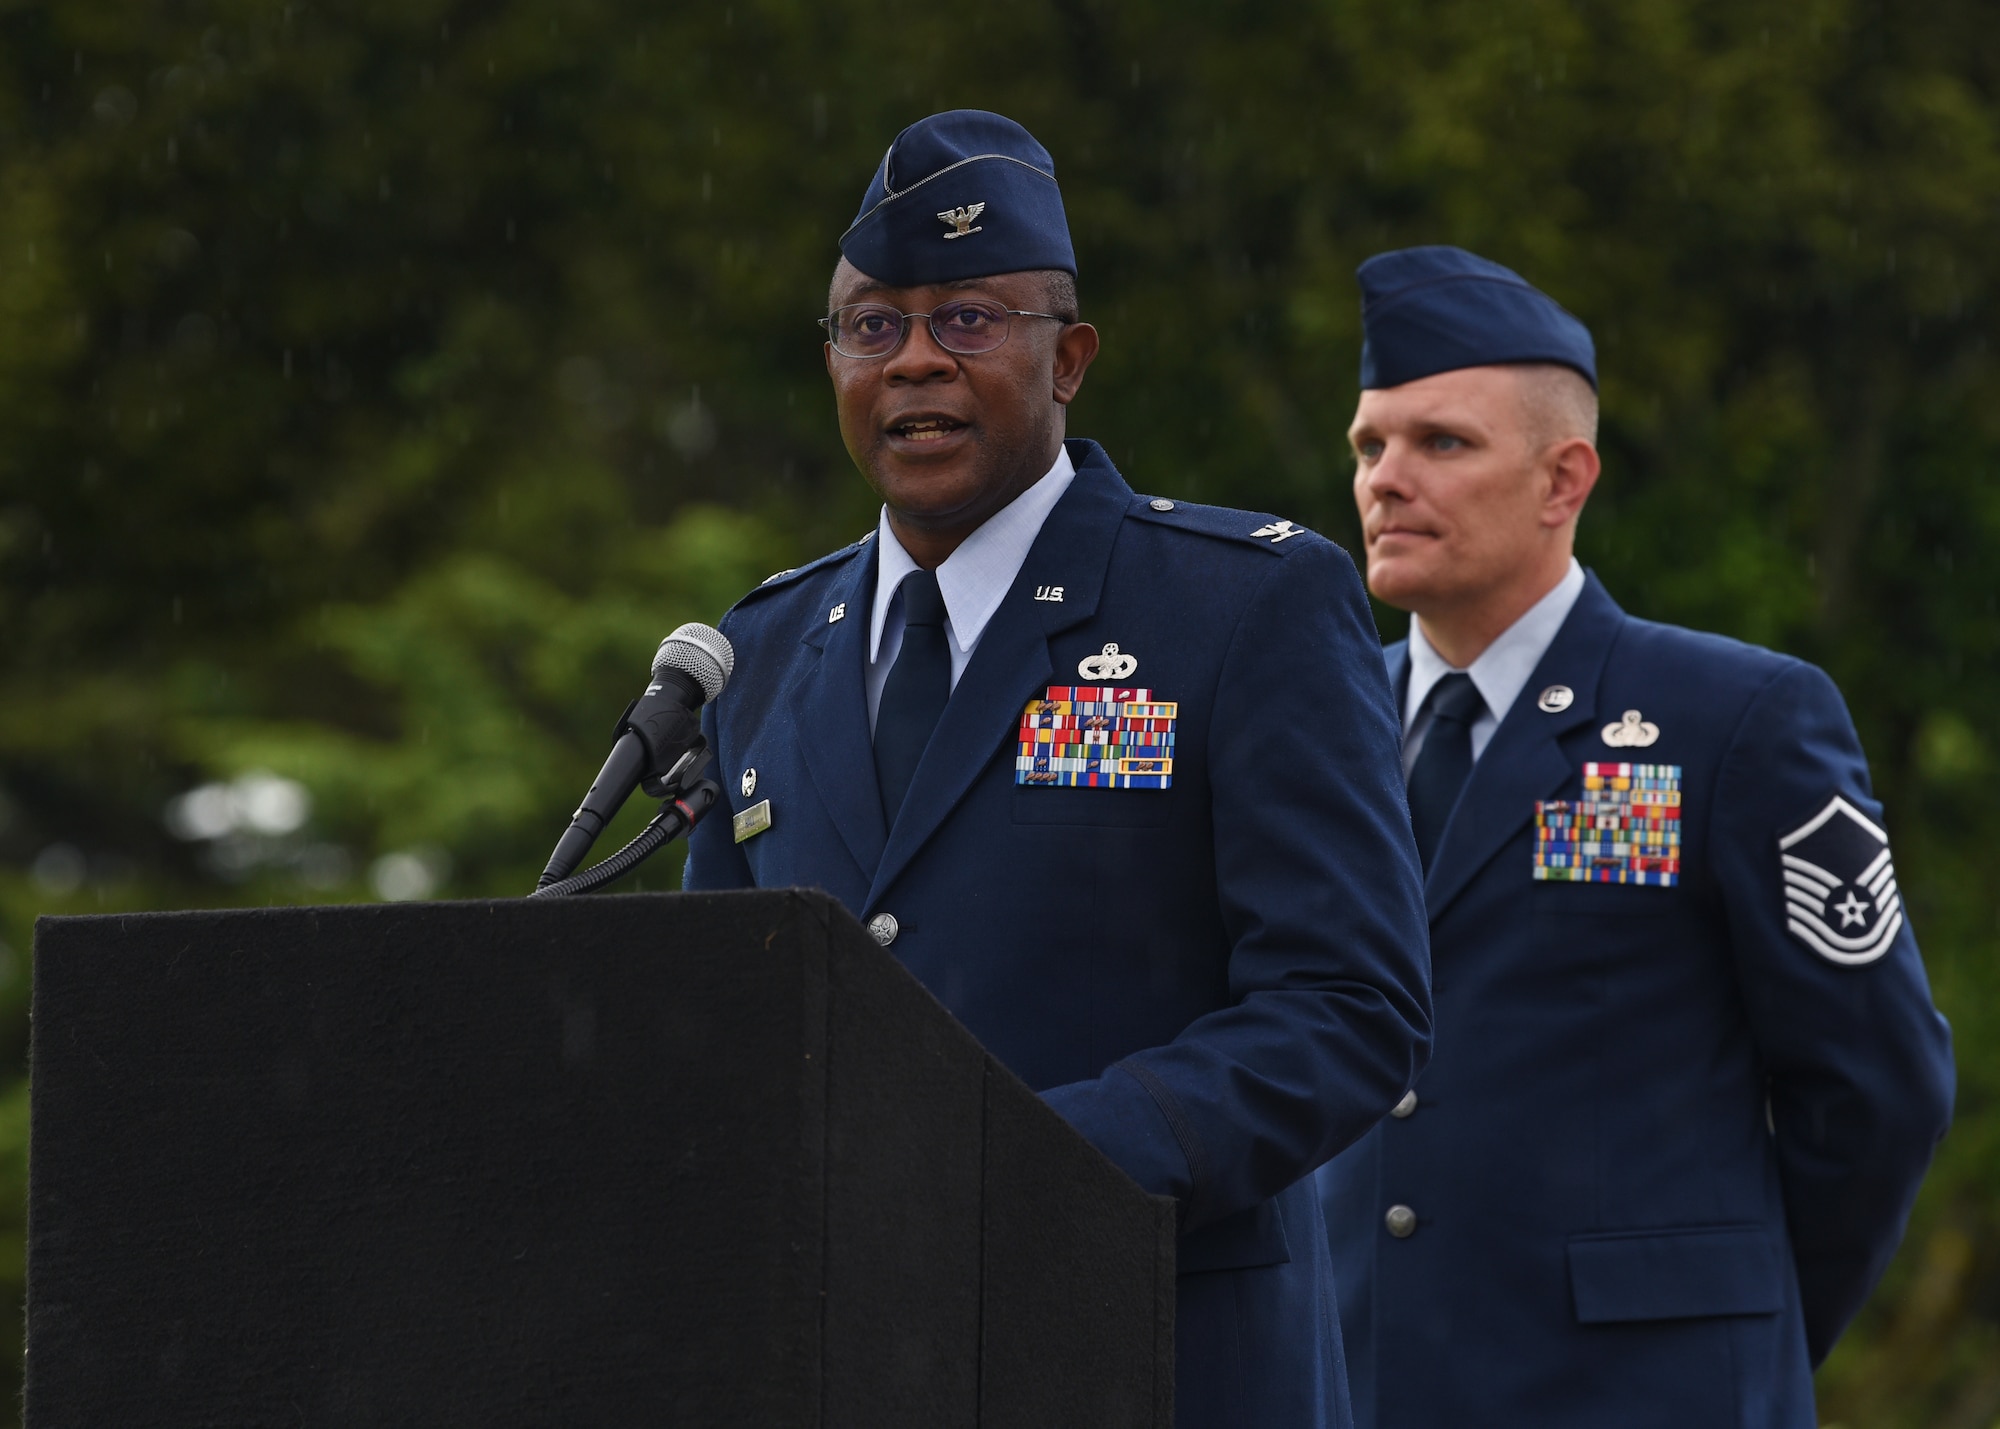 U.S. Air Force Col. Christopher Hall, 627th Air Base Group commander, gives opening remarks during a wreath-laying ceremony at the McChord War Memorial at Joint Base Lewis-McChord, Washington, Sept. 17, 2021. Team McChord Airmen gathered at the memorial for the POW/MIA wreath-laying ceremony to pay their respects to the more than 81,000 American heroes who were, and may still be, missing in action and those who were prisoners of war. (U.S. Air Force photo by Senior Airman Zoe Thacker)